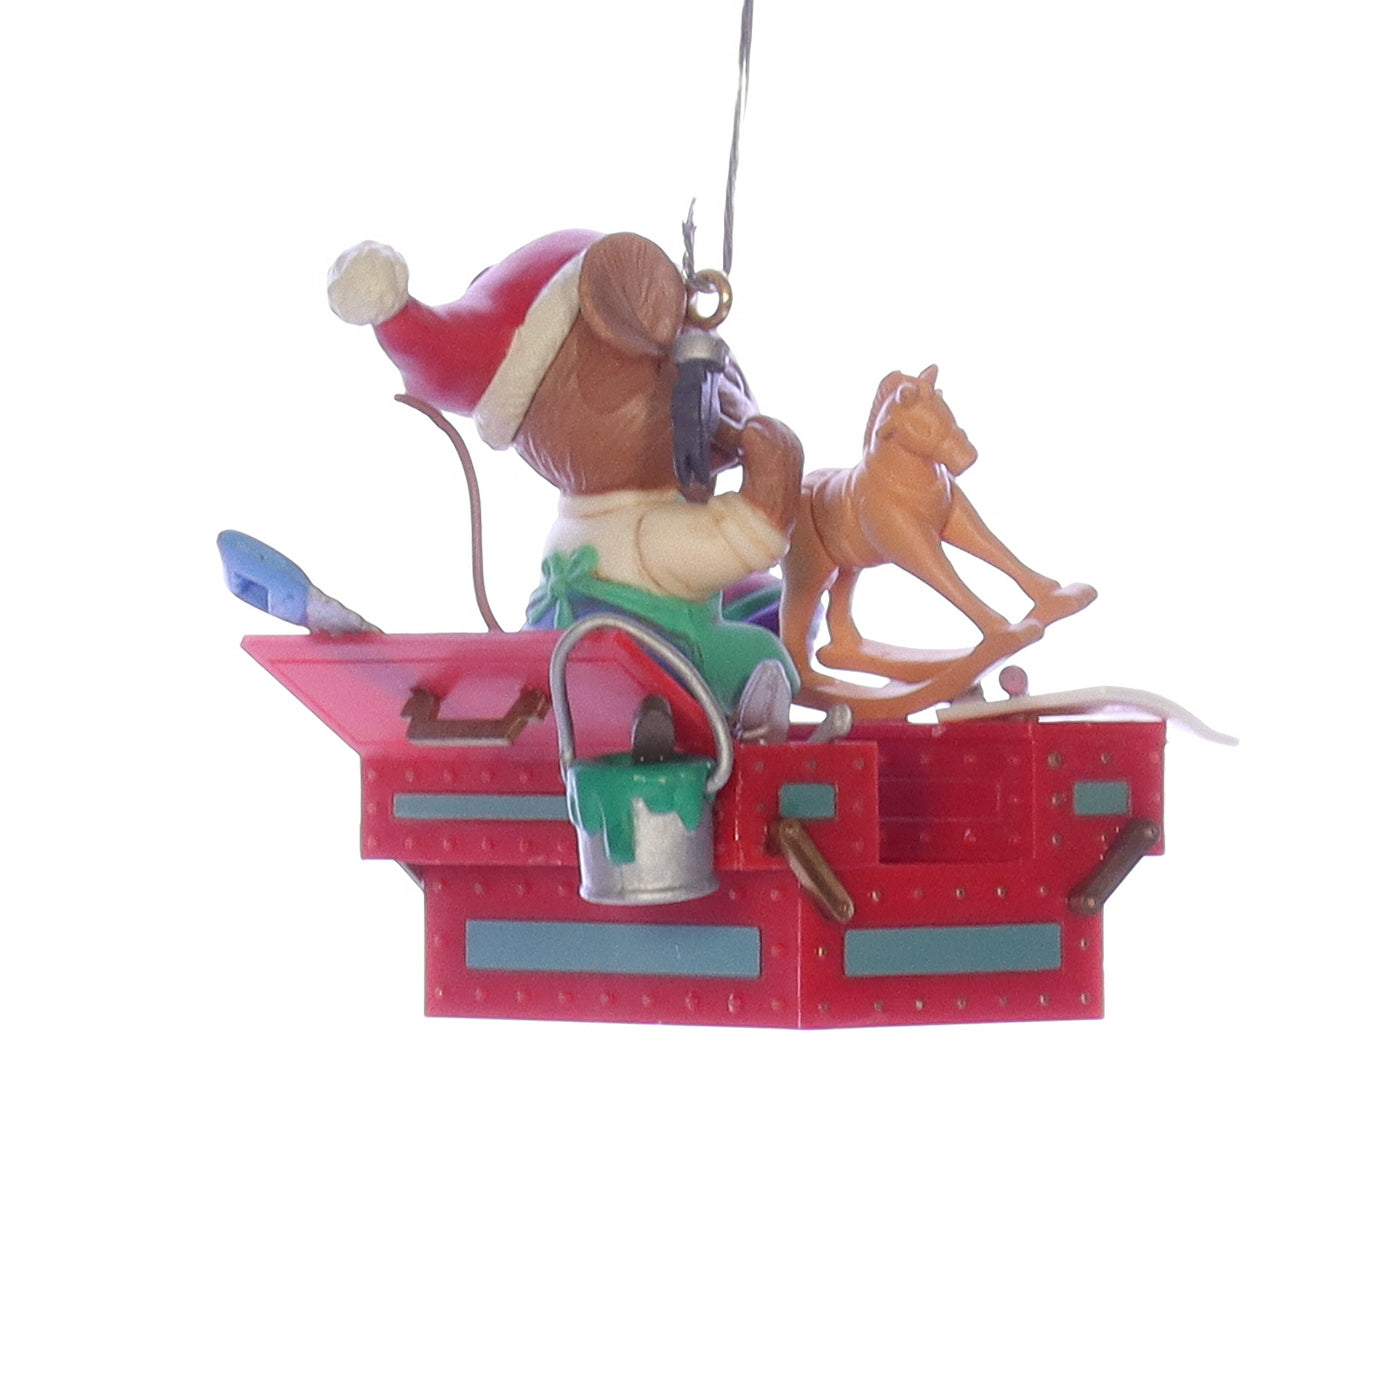 Enesco_Treasury_of_Christmas_Ornaments_584886_Merry_Christmas_Tool_You_Dad_Mouse_Ornament_1994 Back Right View